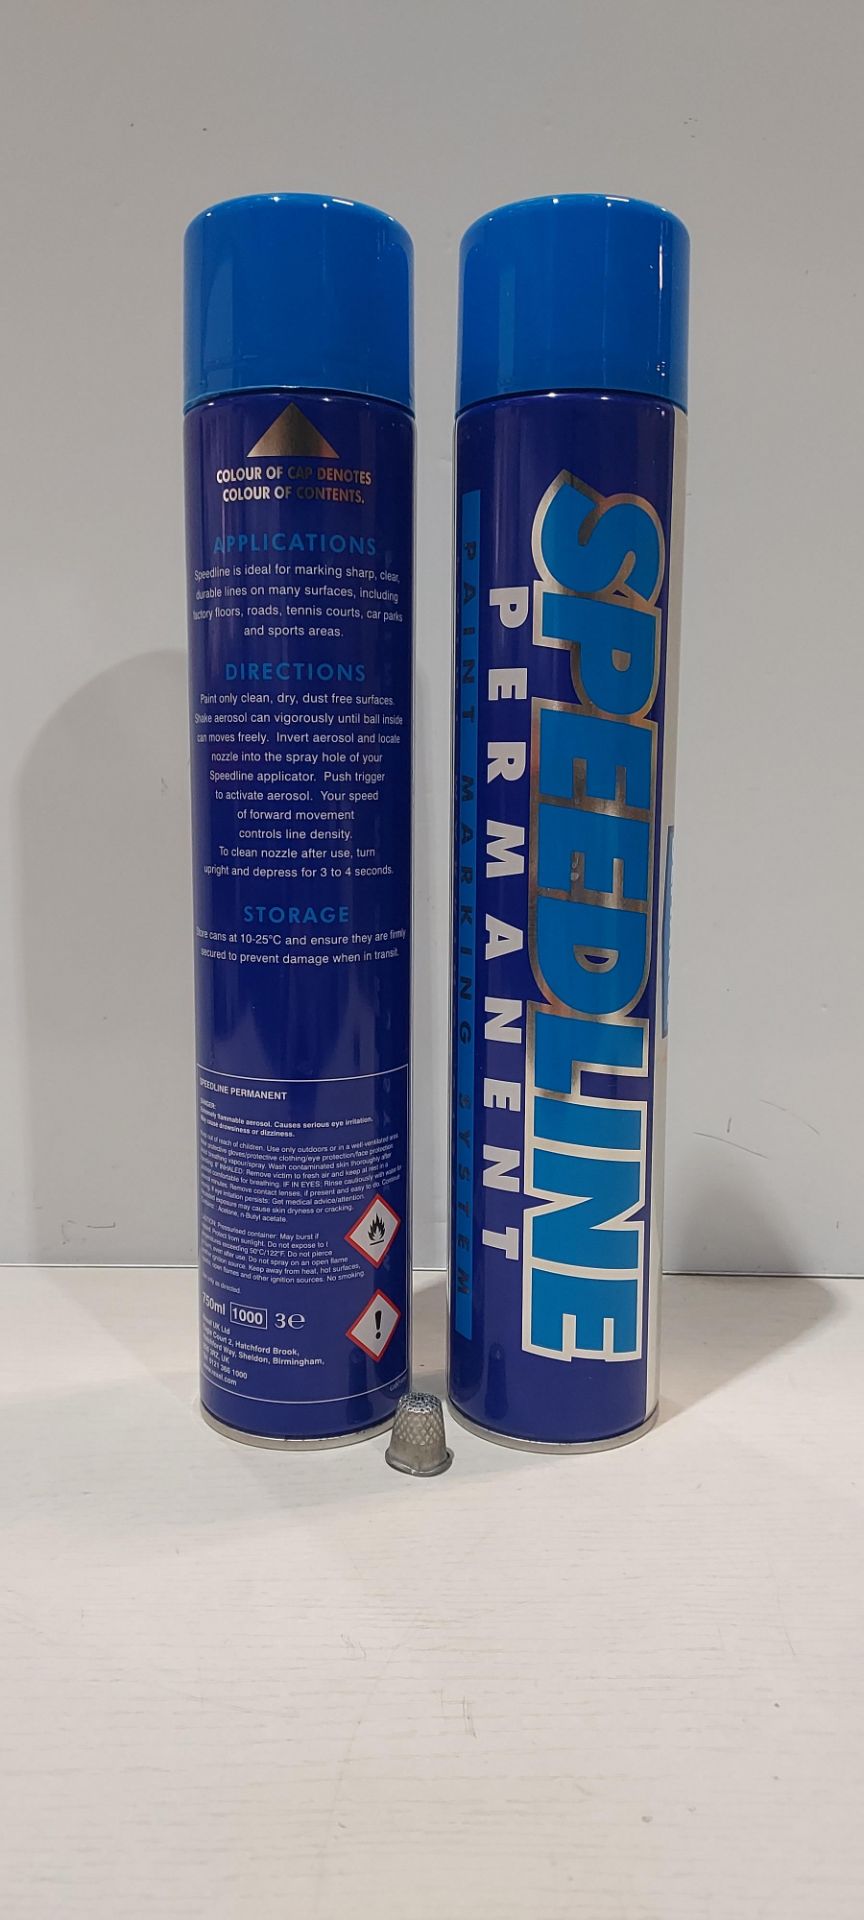 66 X BRAND NEW SPEEDLINE PERMANENT PAINT MARKING SPRAY CANS -IN BLUE 750ML - IN 11 BOXES